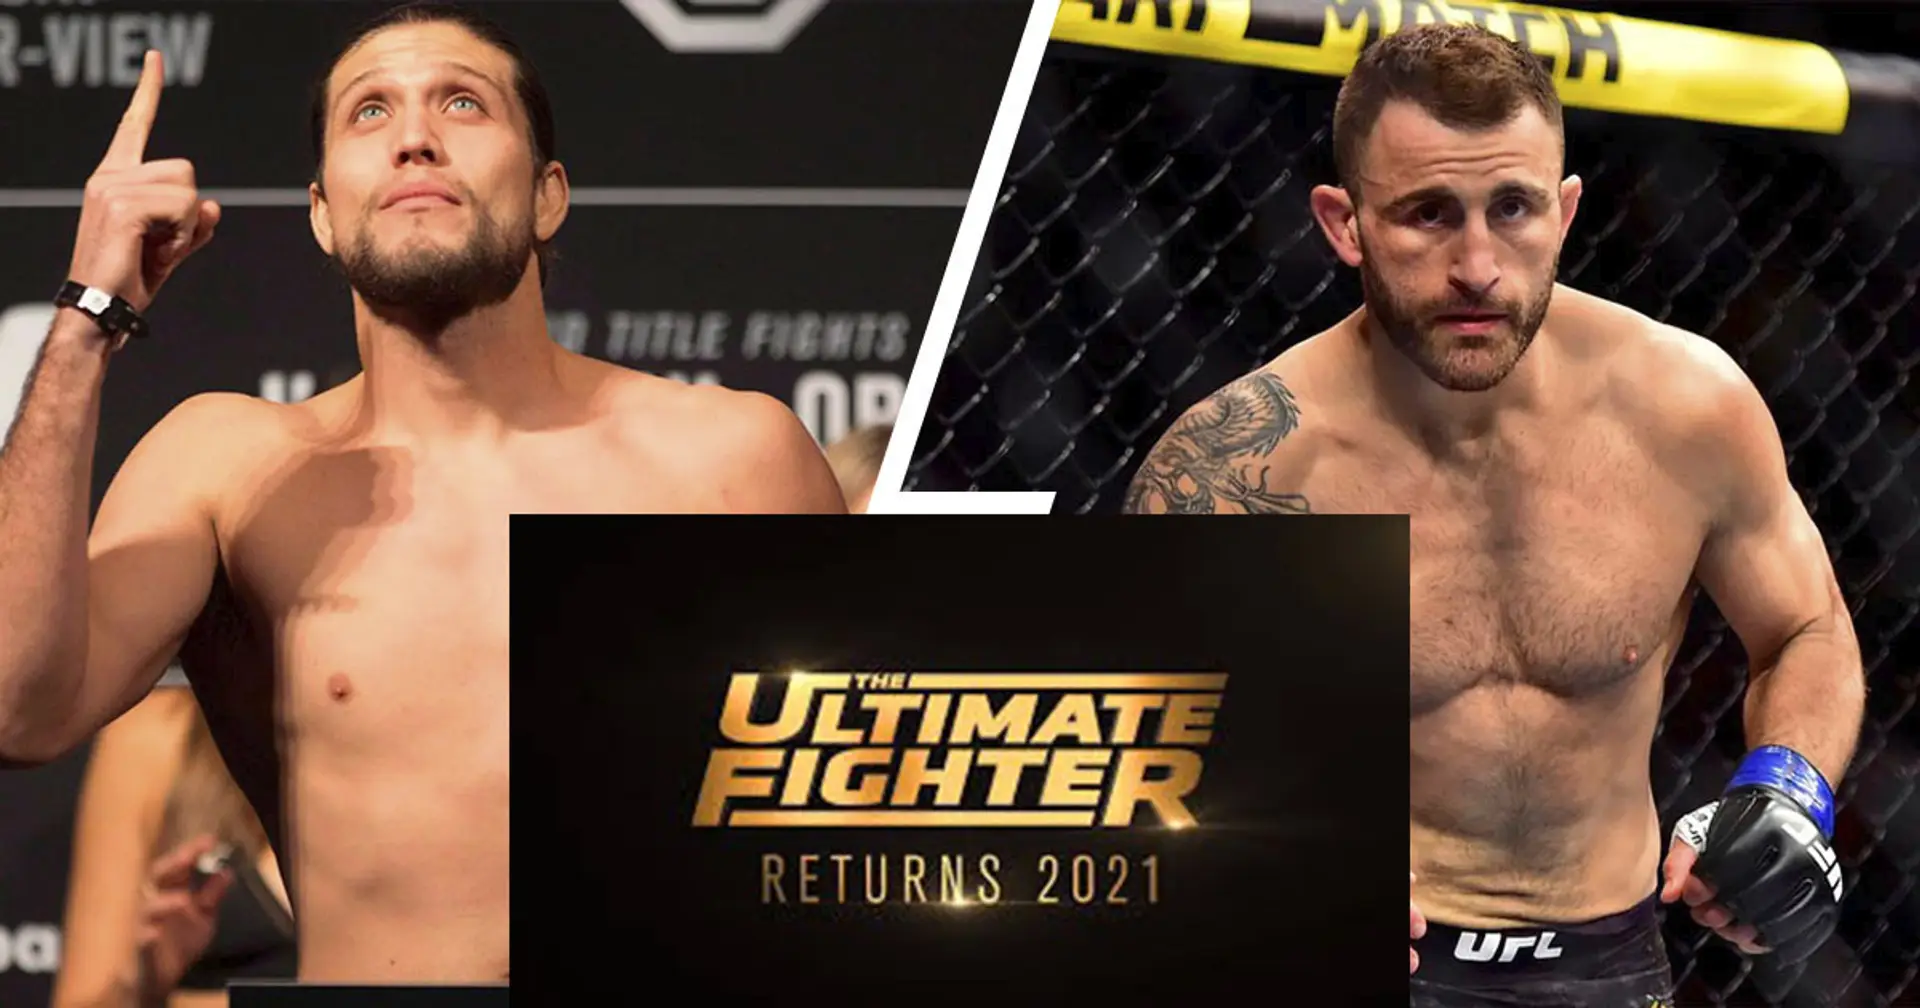 UFC restart The Ultimate Fighter after 3-year break, with Ortega and Volkanovski as coaches